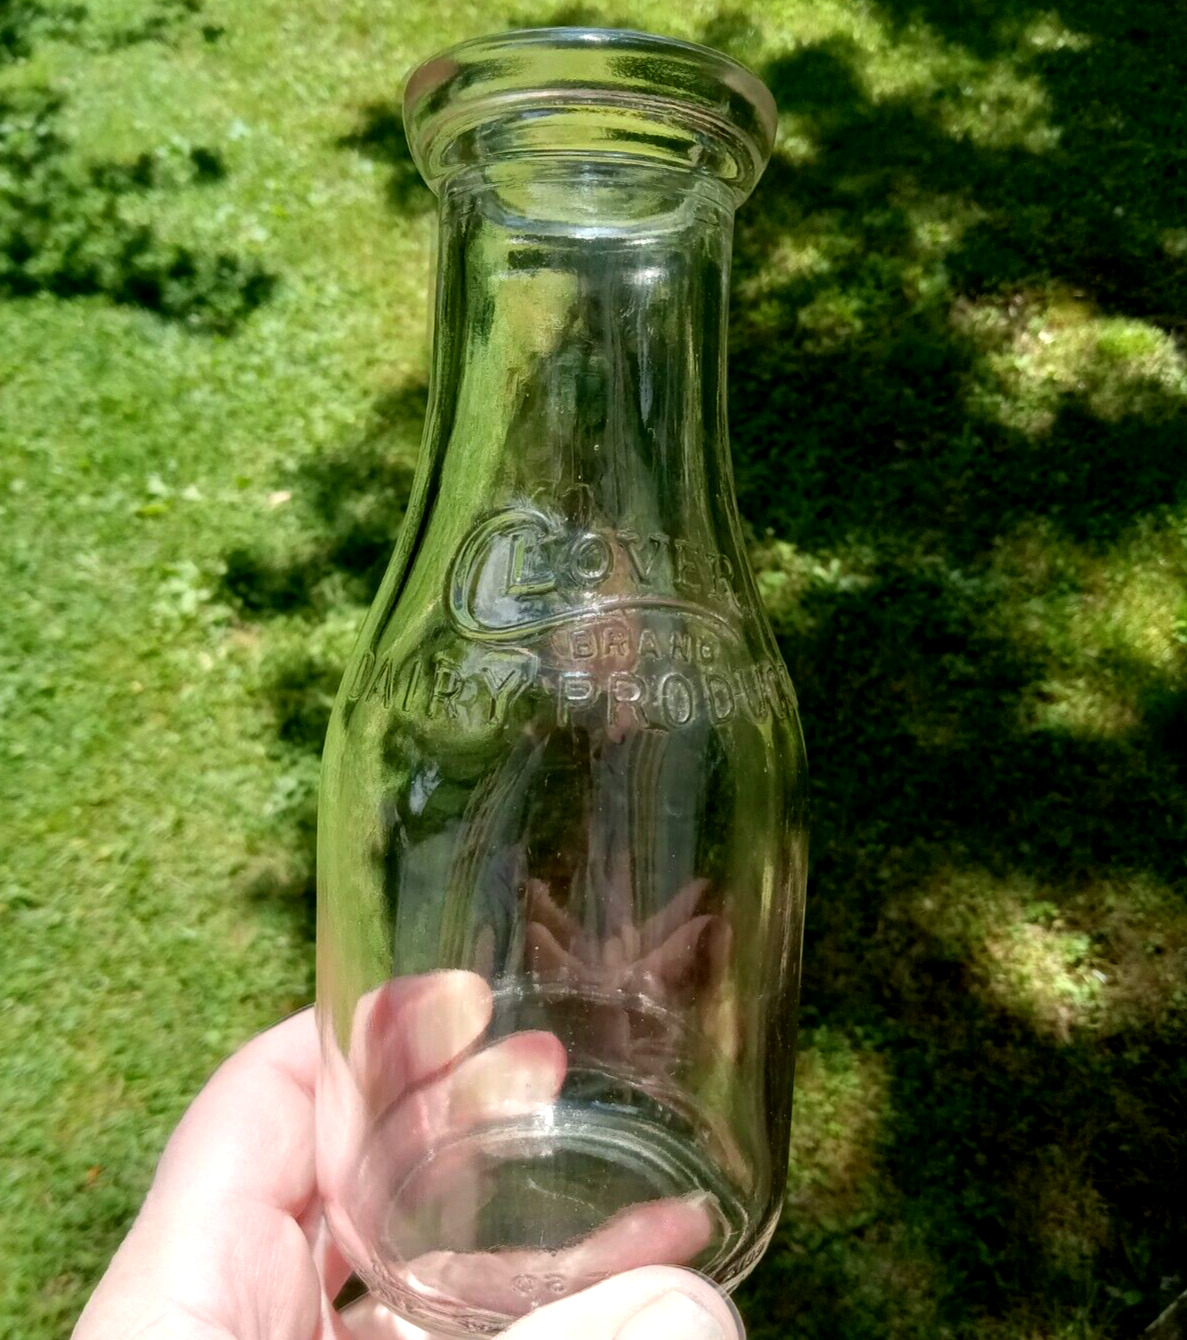 CLOVER BRAND PRODUCTS Embossed Glass Pint Milk Bottle LIQ-X 3100 Vintage